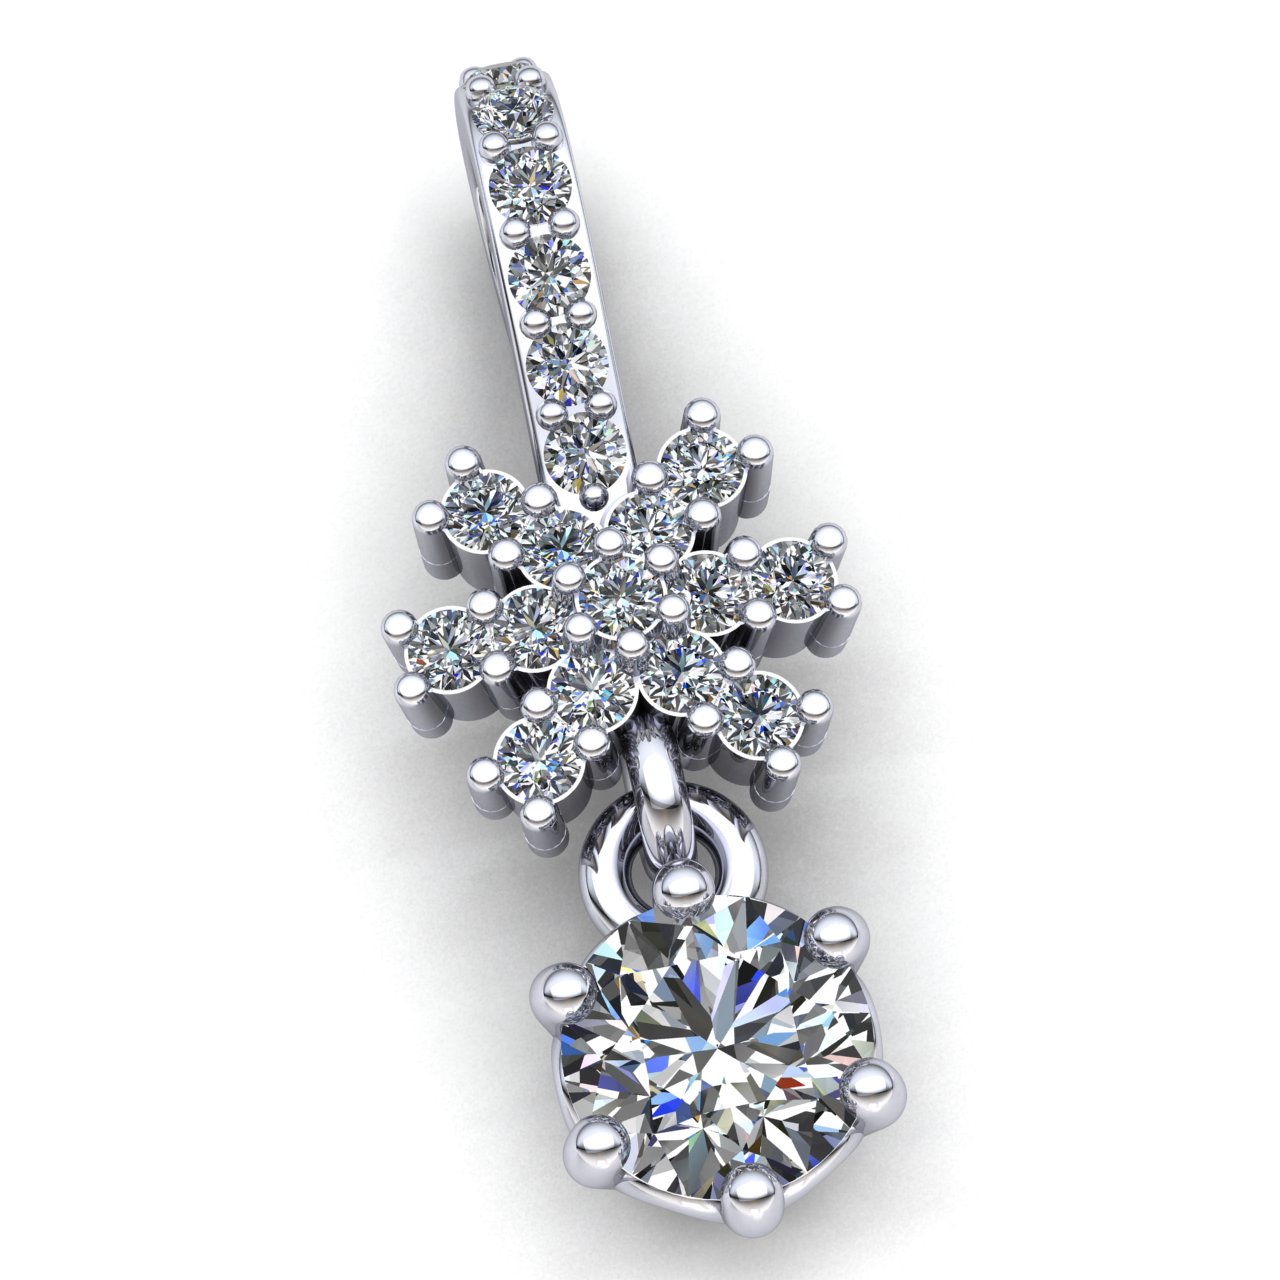 Jewel We Sell Real 0.25carat Round Cut Diamond Ladies Flower Solitaire Pendant Solid 14K White Gold IJ SI2